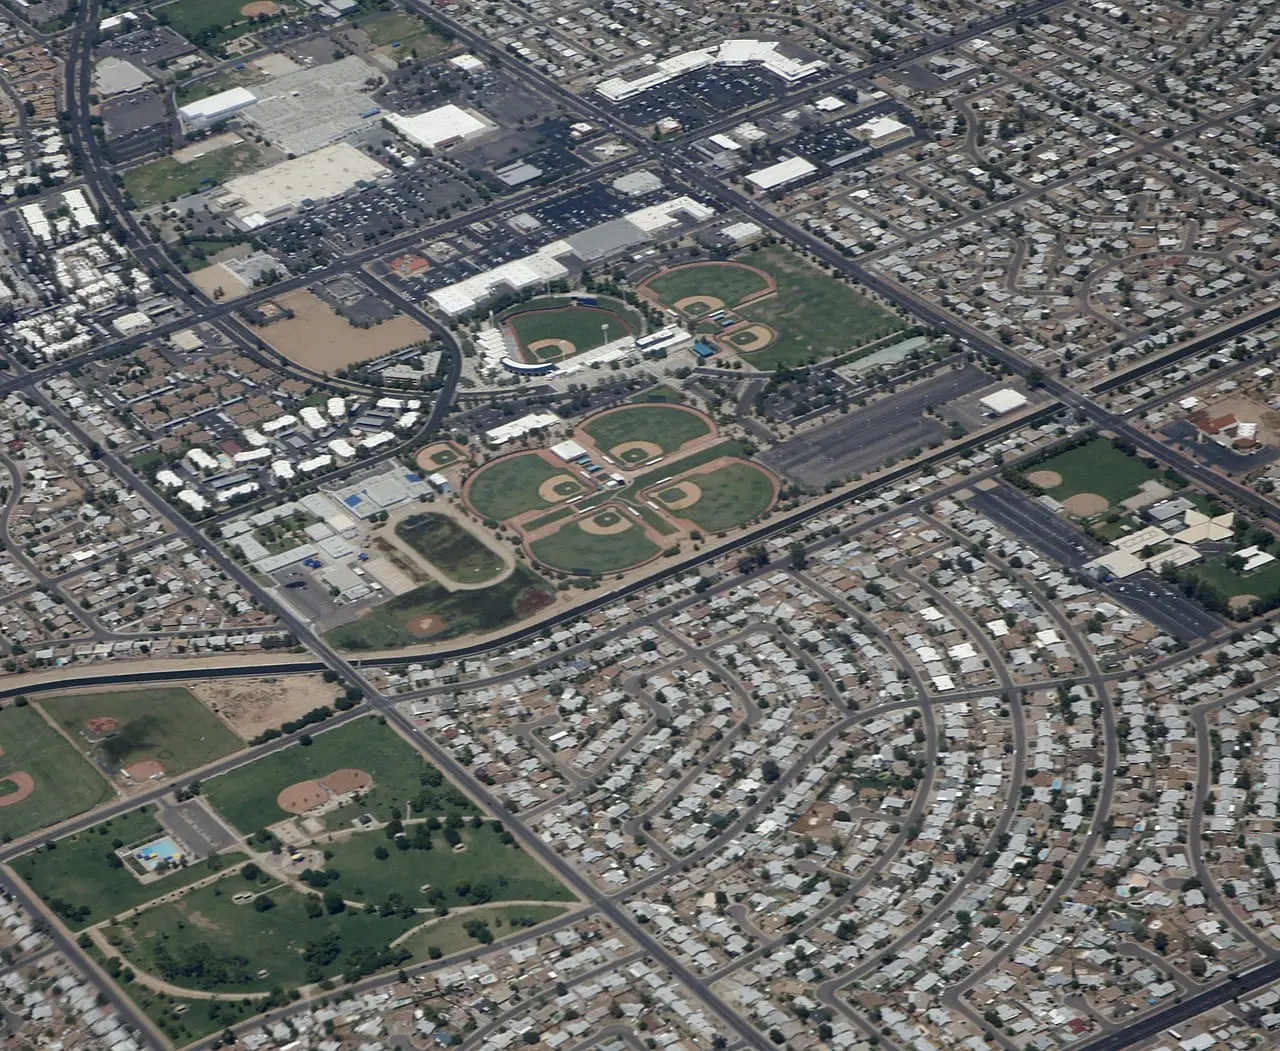 The Phoenix Maryvale Urban Village- An Oasis in the Heart of Arizona - Photo Source